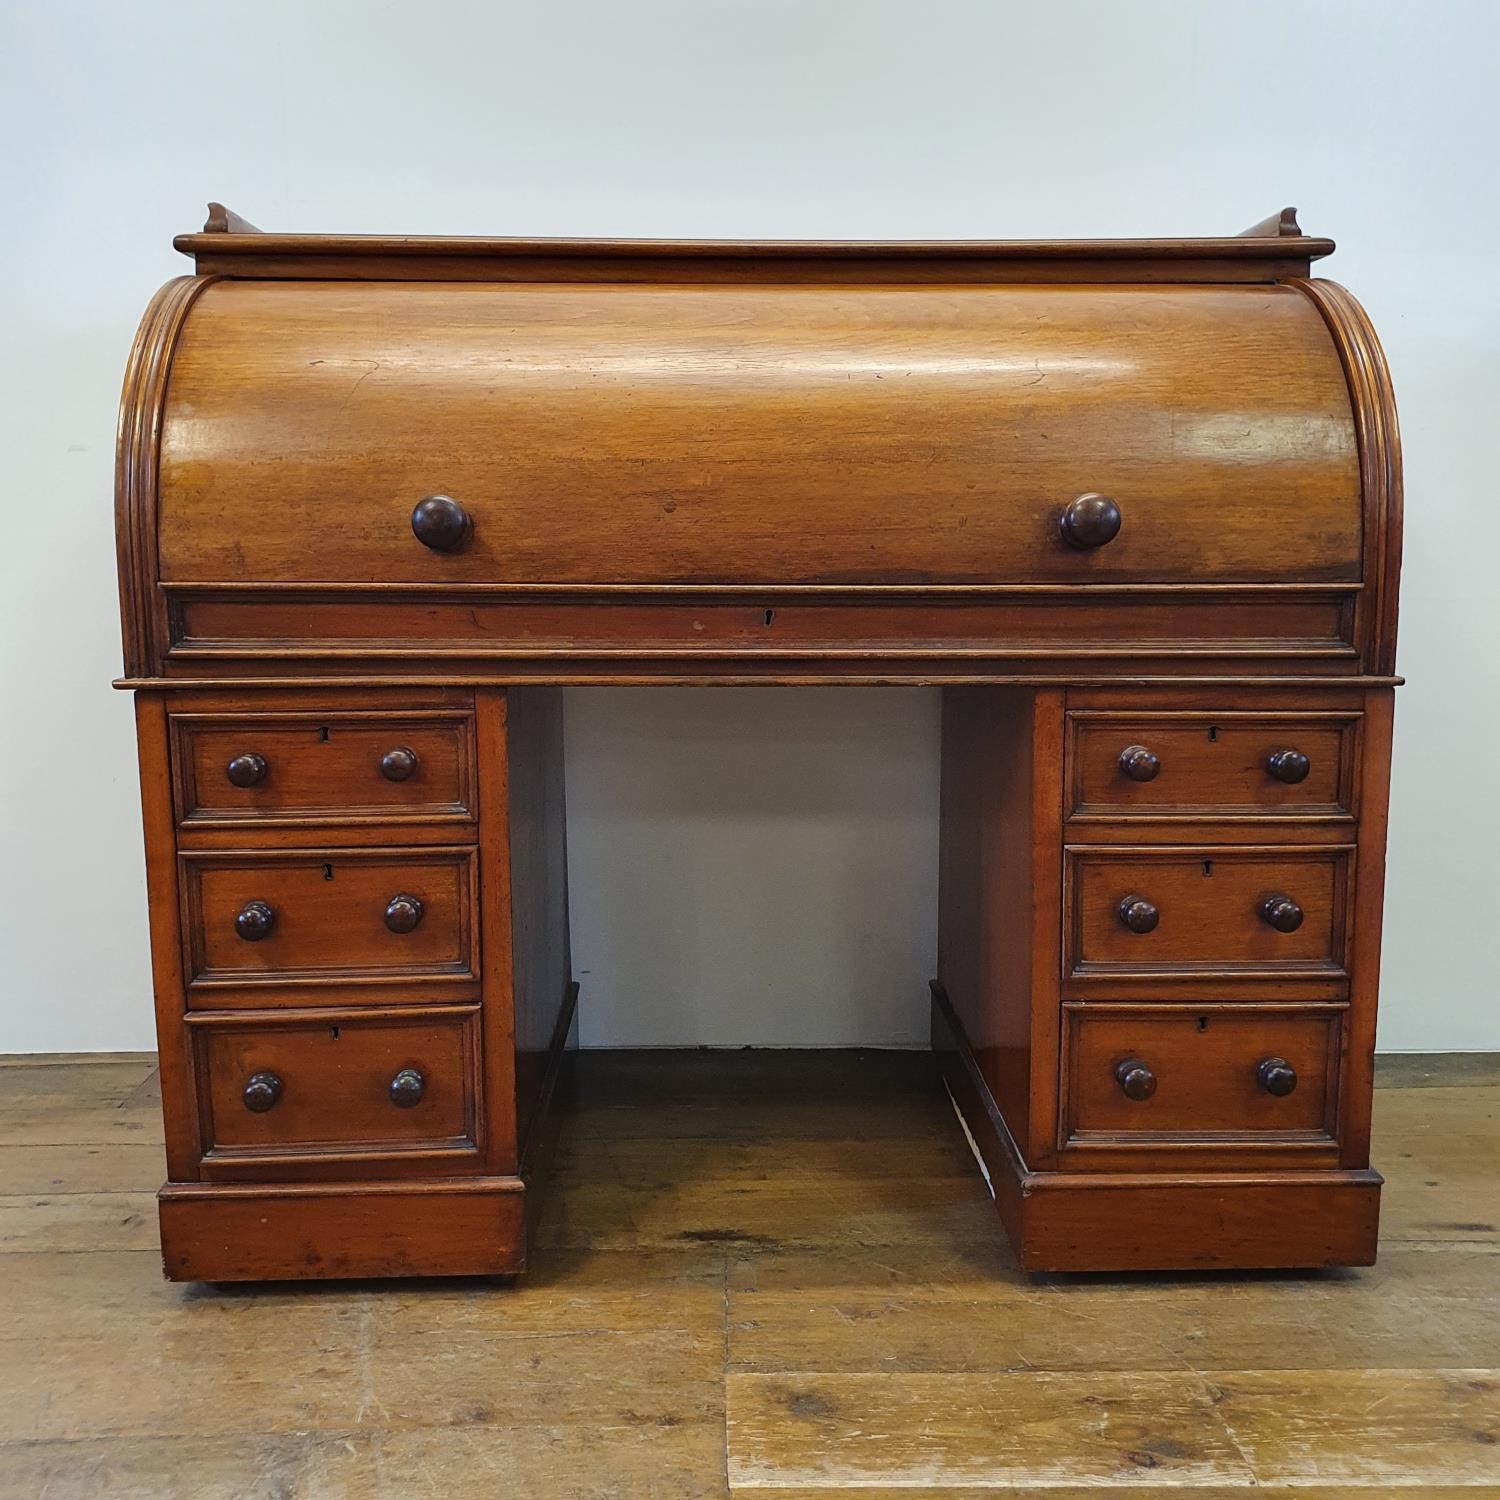 A 19th century mahogany cylinder desk, with a fitted interior, on a base with six drawers, 122 cm - Image 6 of 6